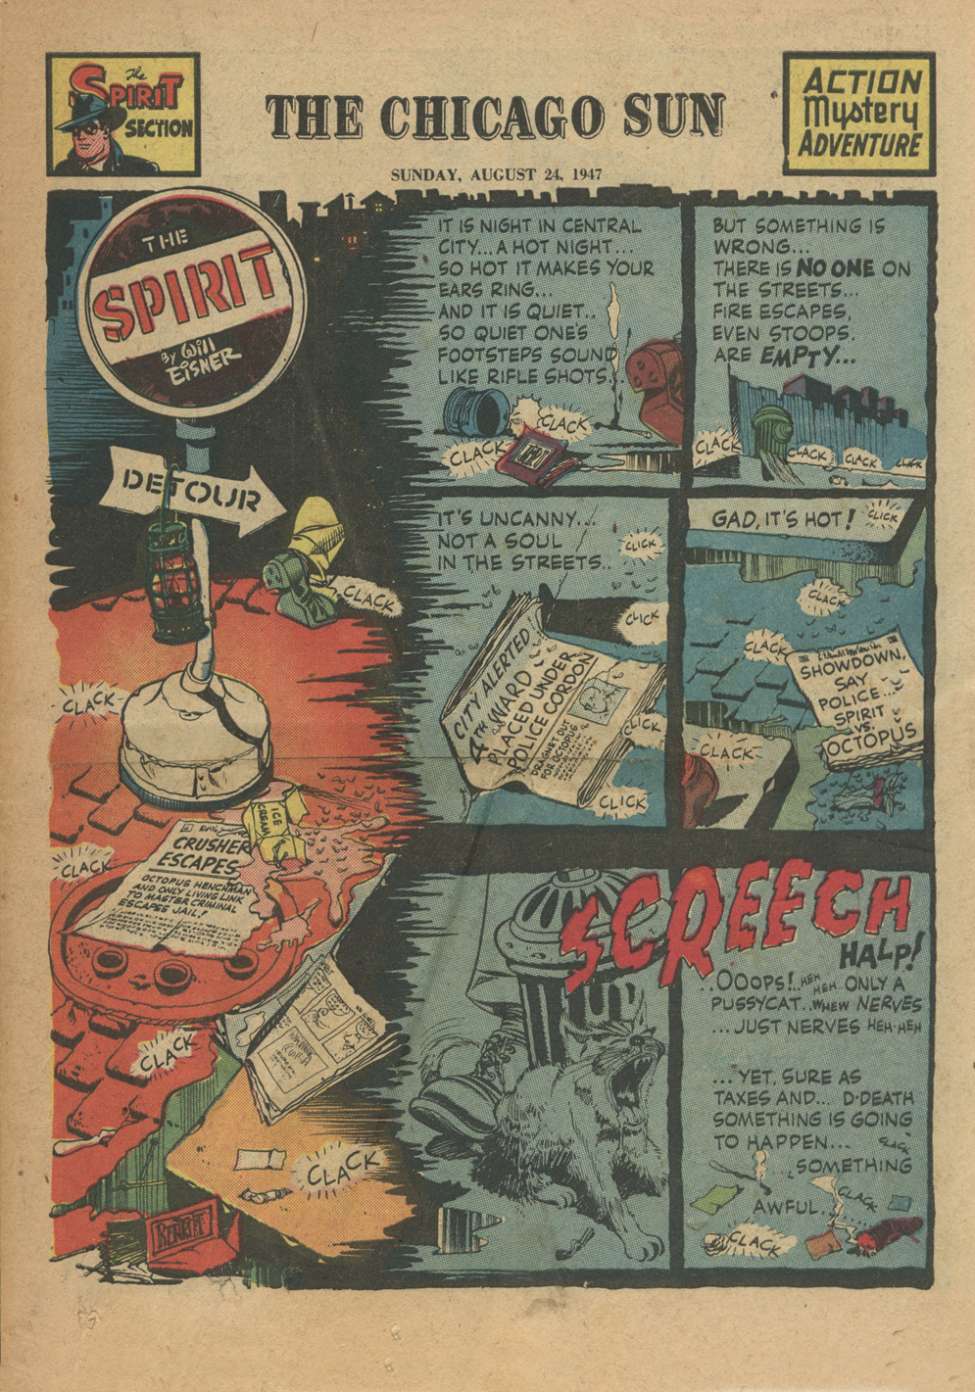 Book Cover For The Spirit (1947-08-24) - Chicago Sun